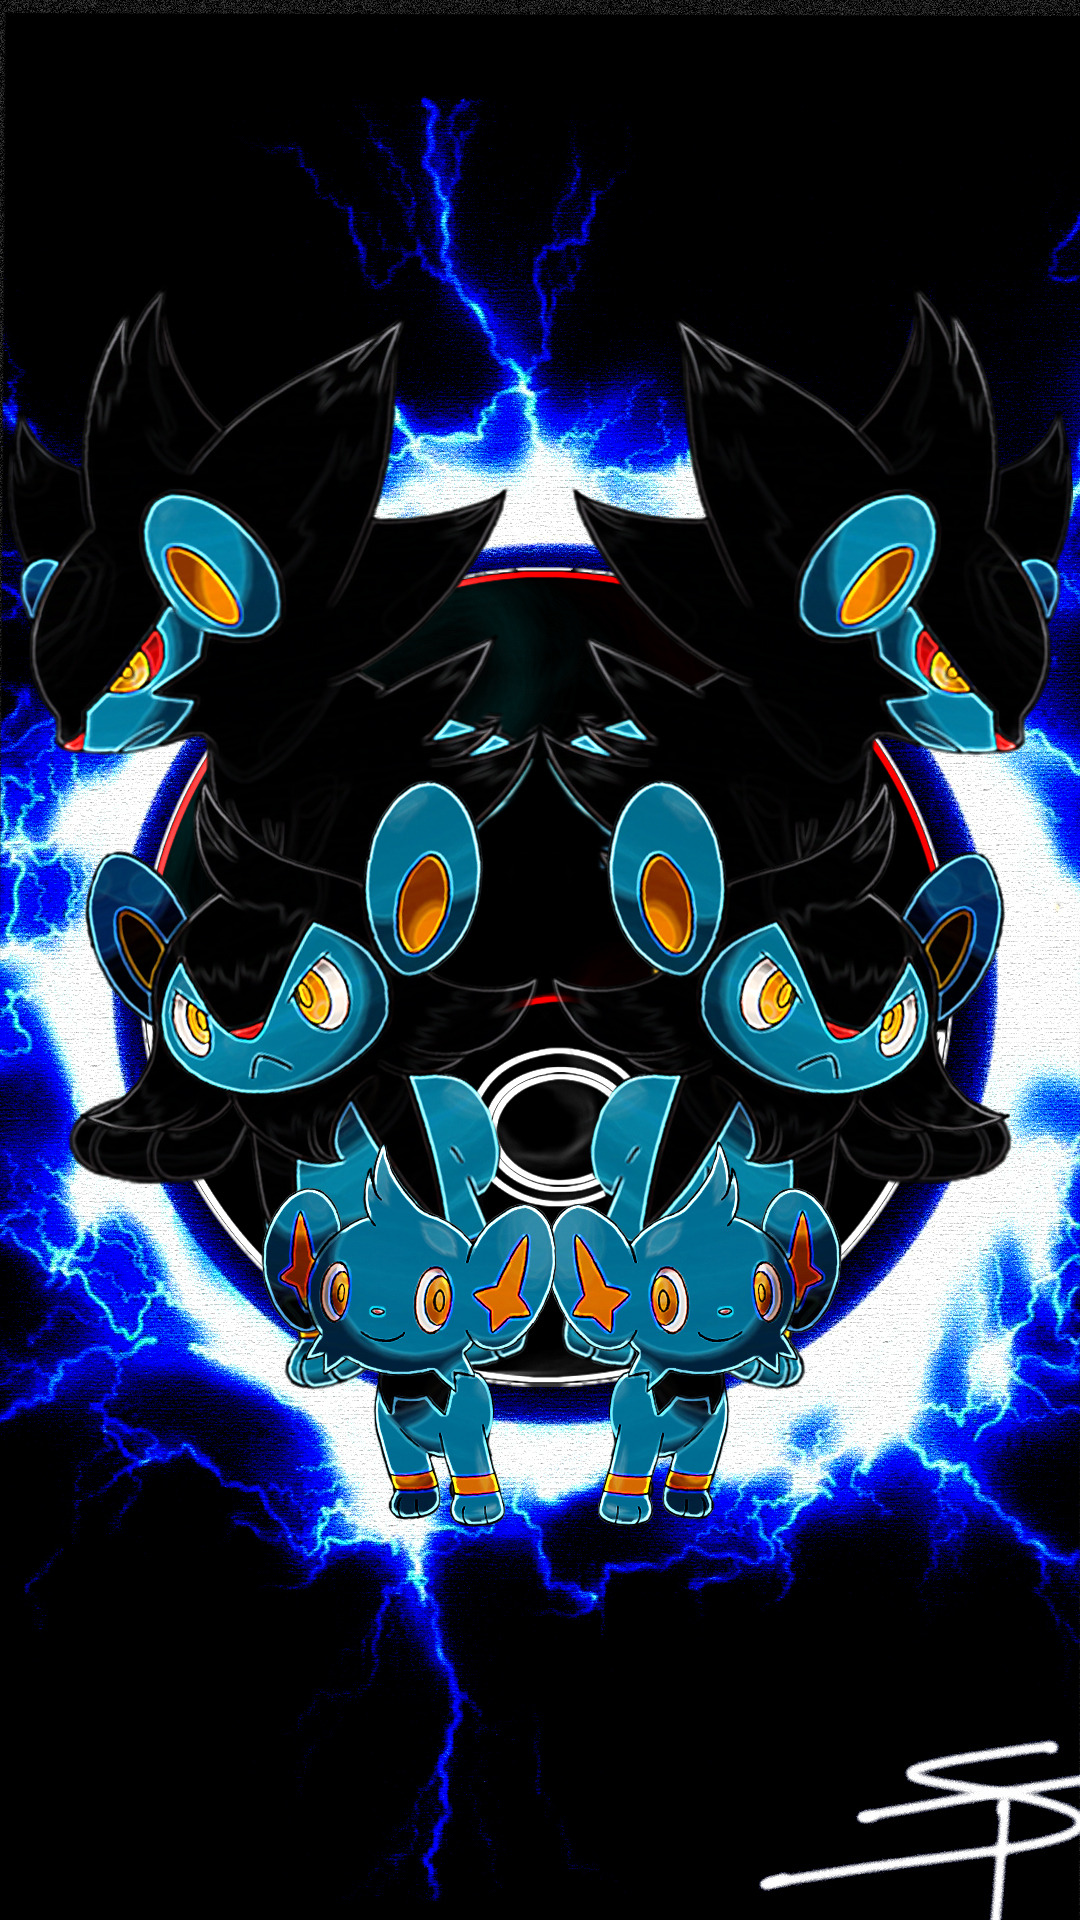 Here Is The Luxray Wallpaper That Someone Ask For - Luxray Wallpaper Phone - HD Wallpaper 